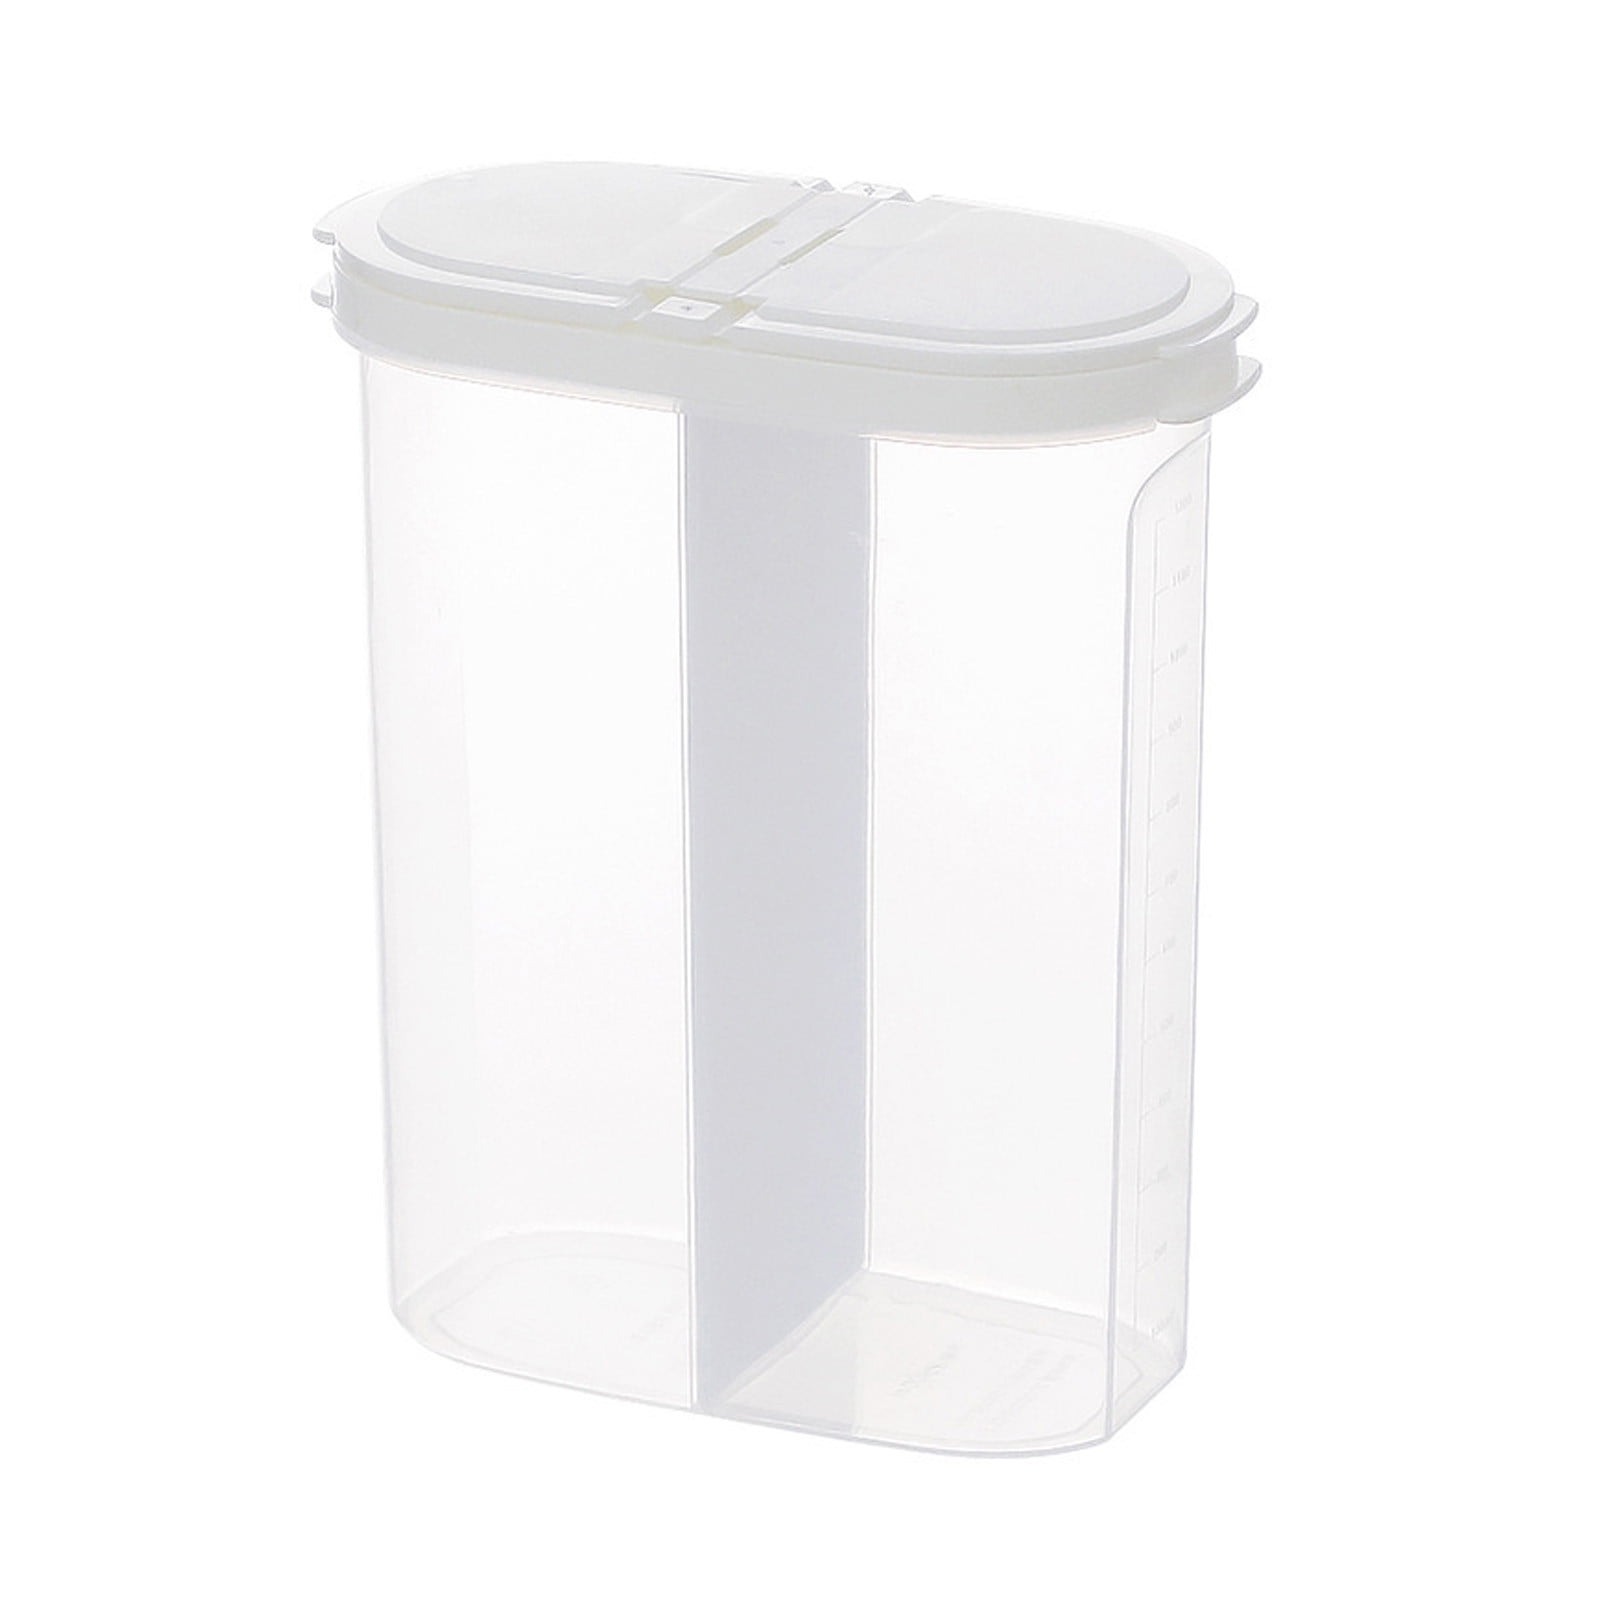 Chef's Path Extra Large Food Storage Containers with Lids Airtight  (6.5L|220 Oz|2 Pack) for Flour, Sugar, Rice & Baking Supply - Airtight  Kitchen 